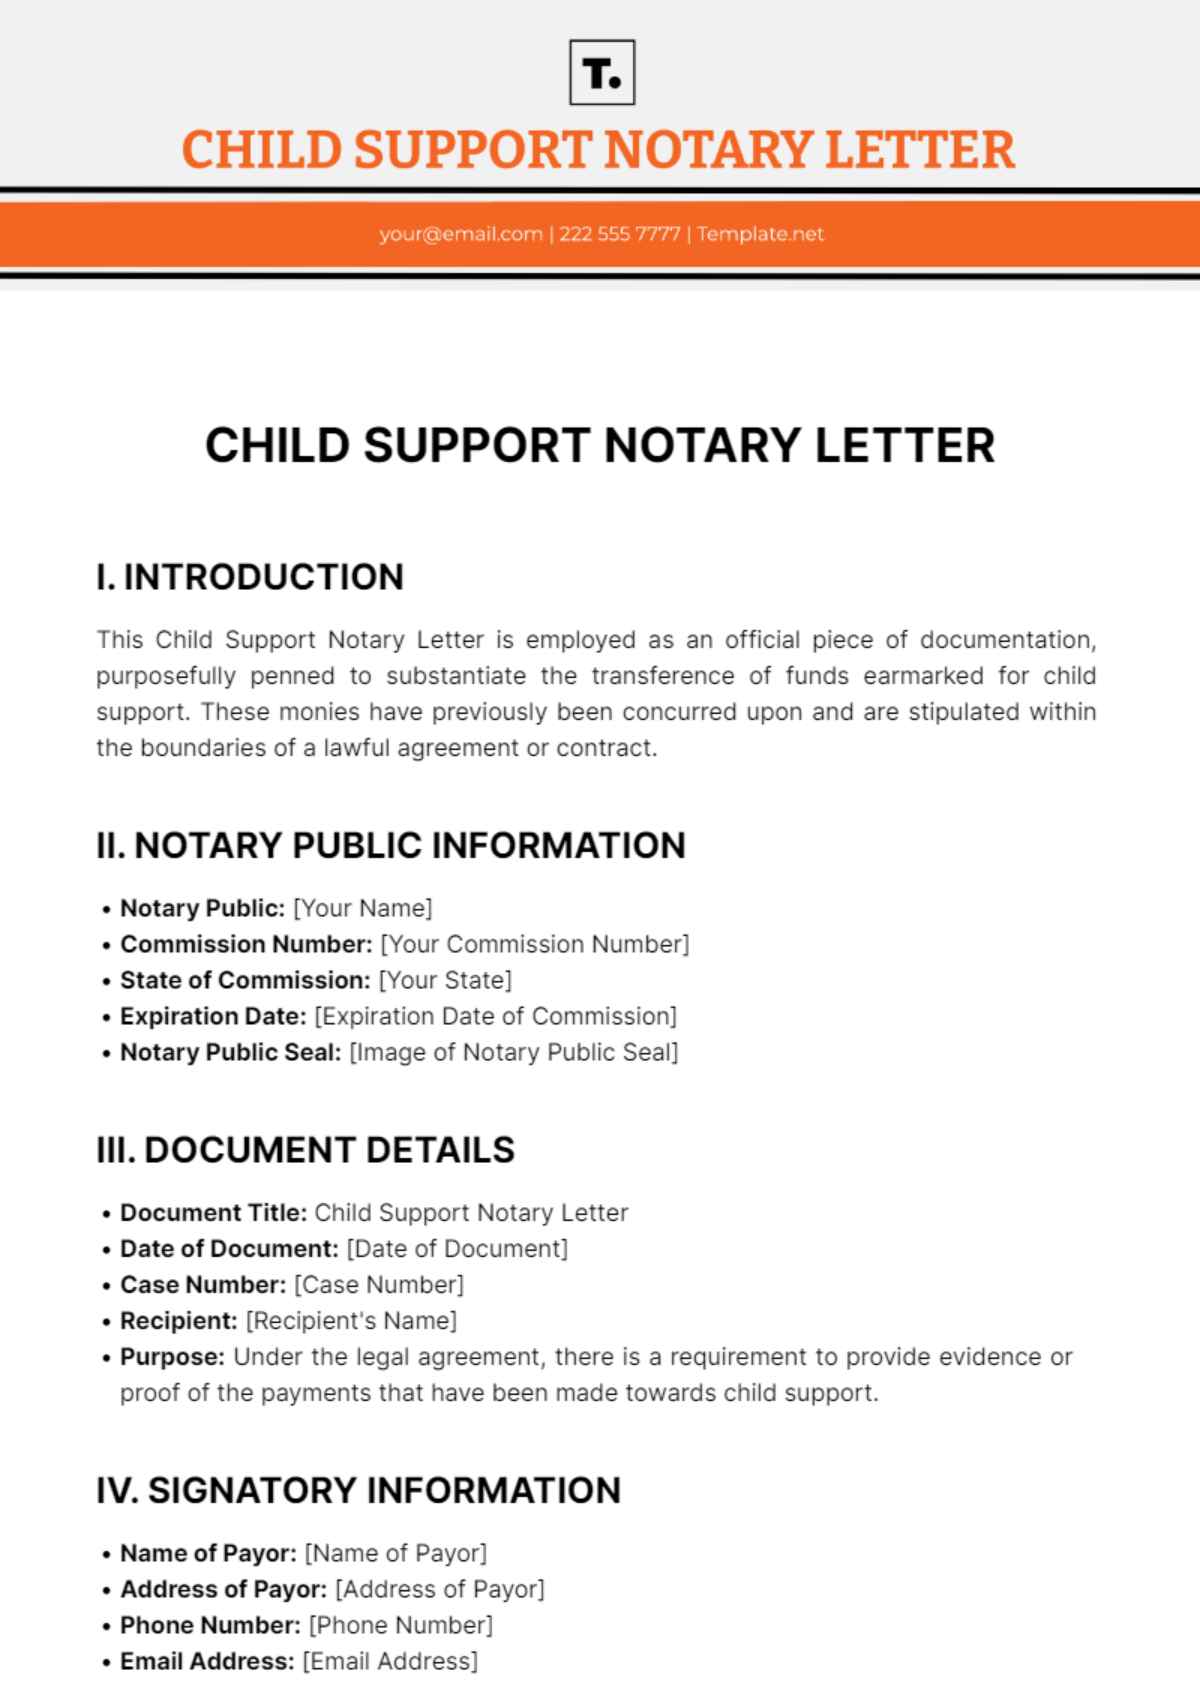 Child Support Notary Letter Template